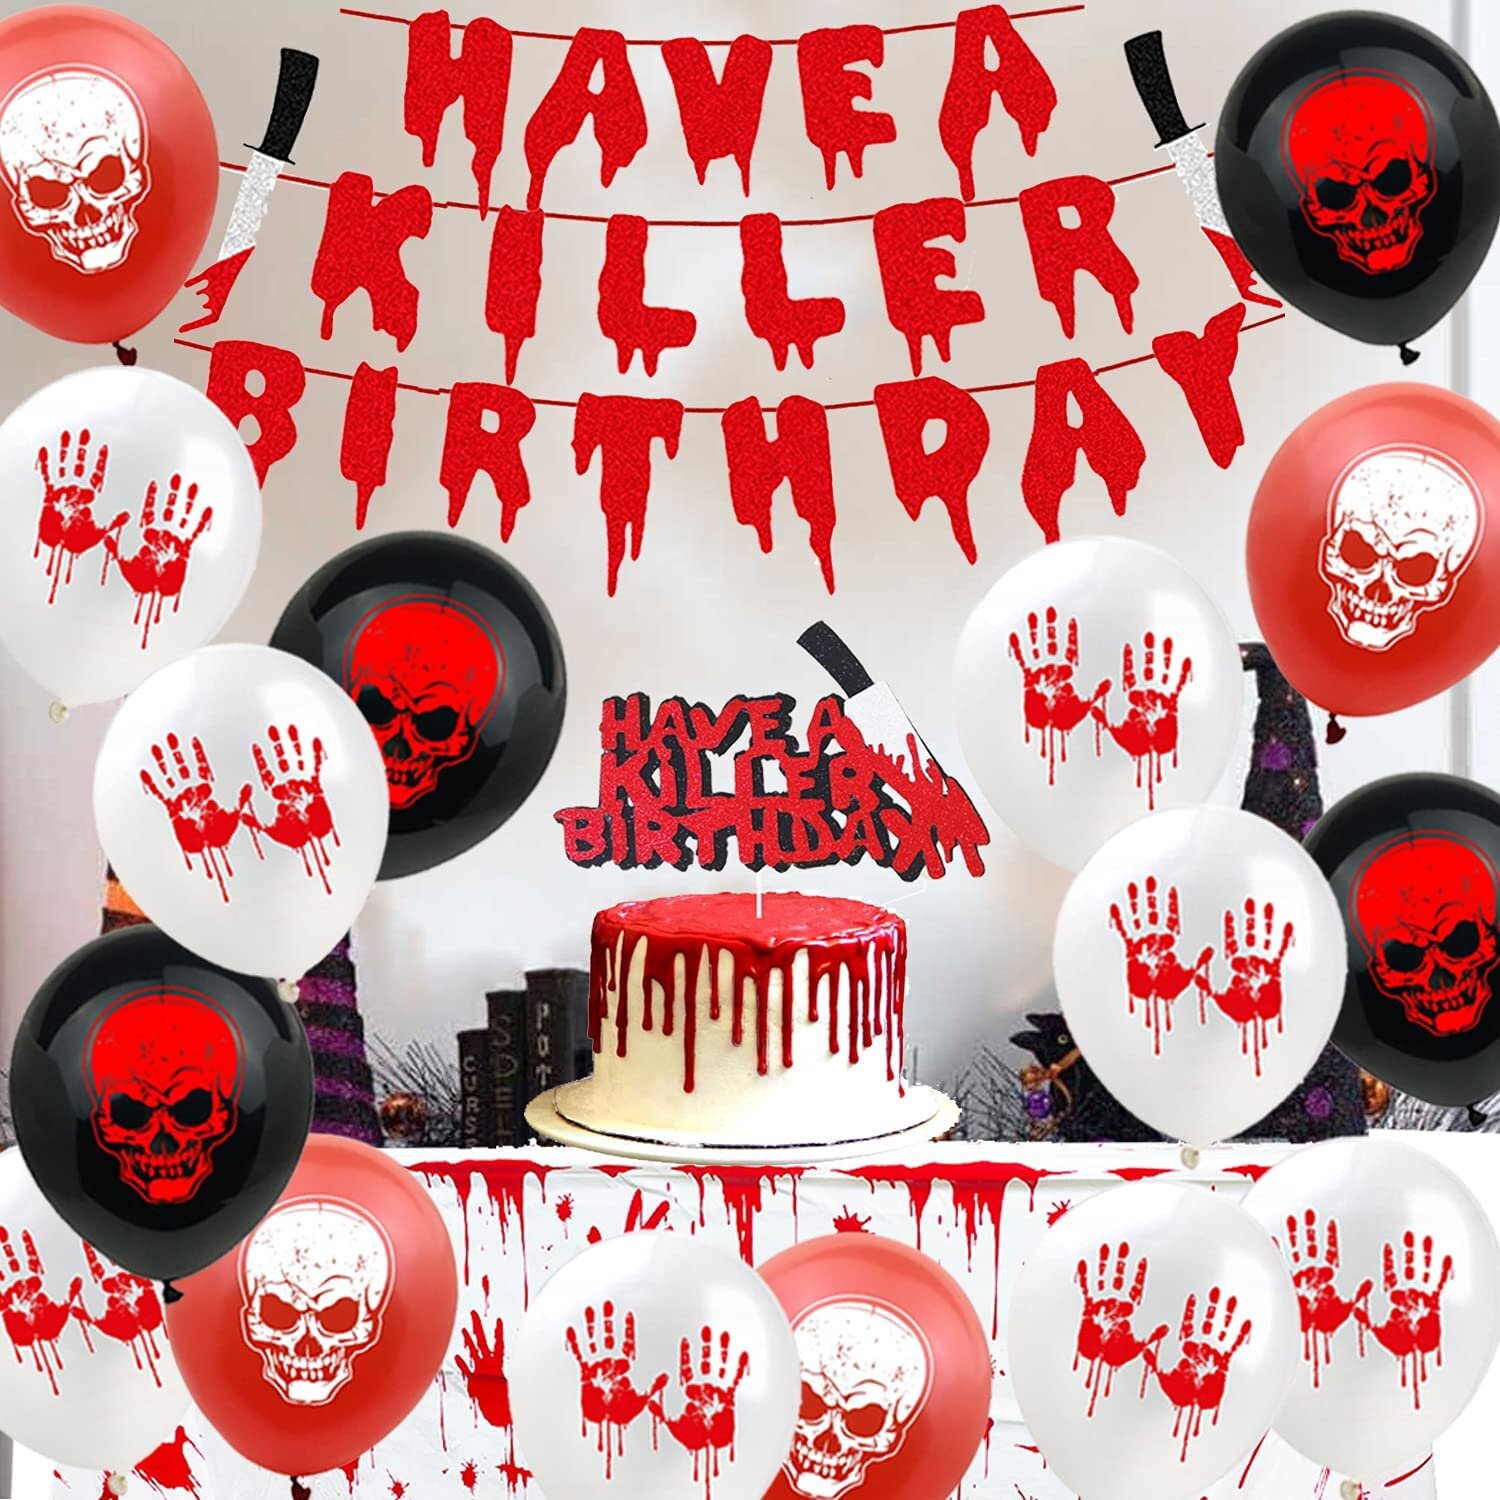 Have a Killer Birthday Banner for Friday the 13th Birthday Party Halloween Horror Themed Birthday Party Decorations